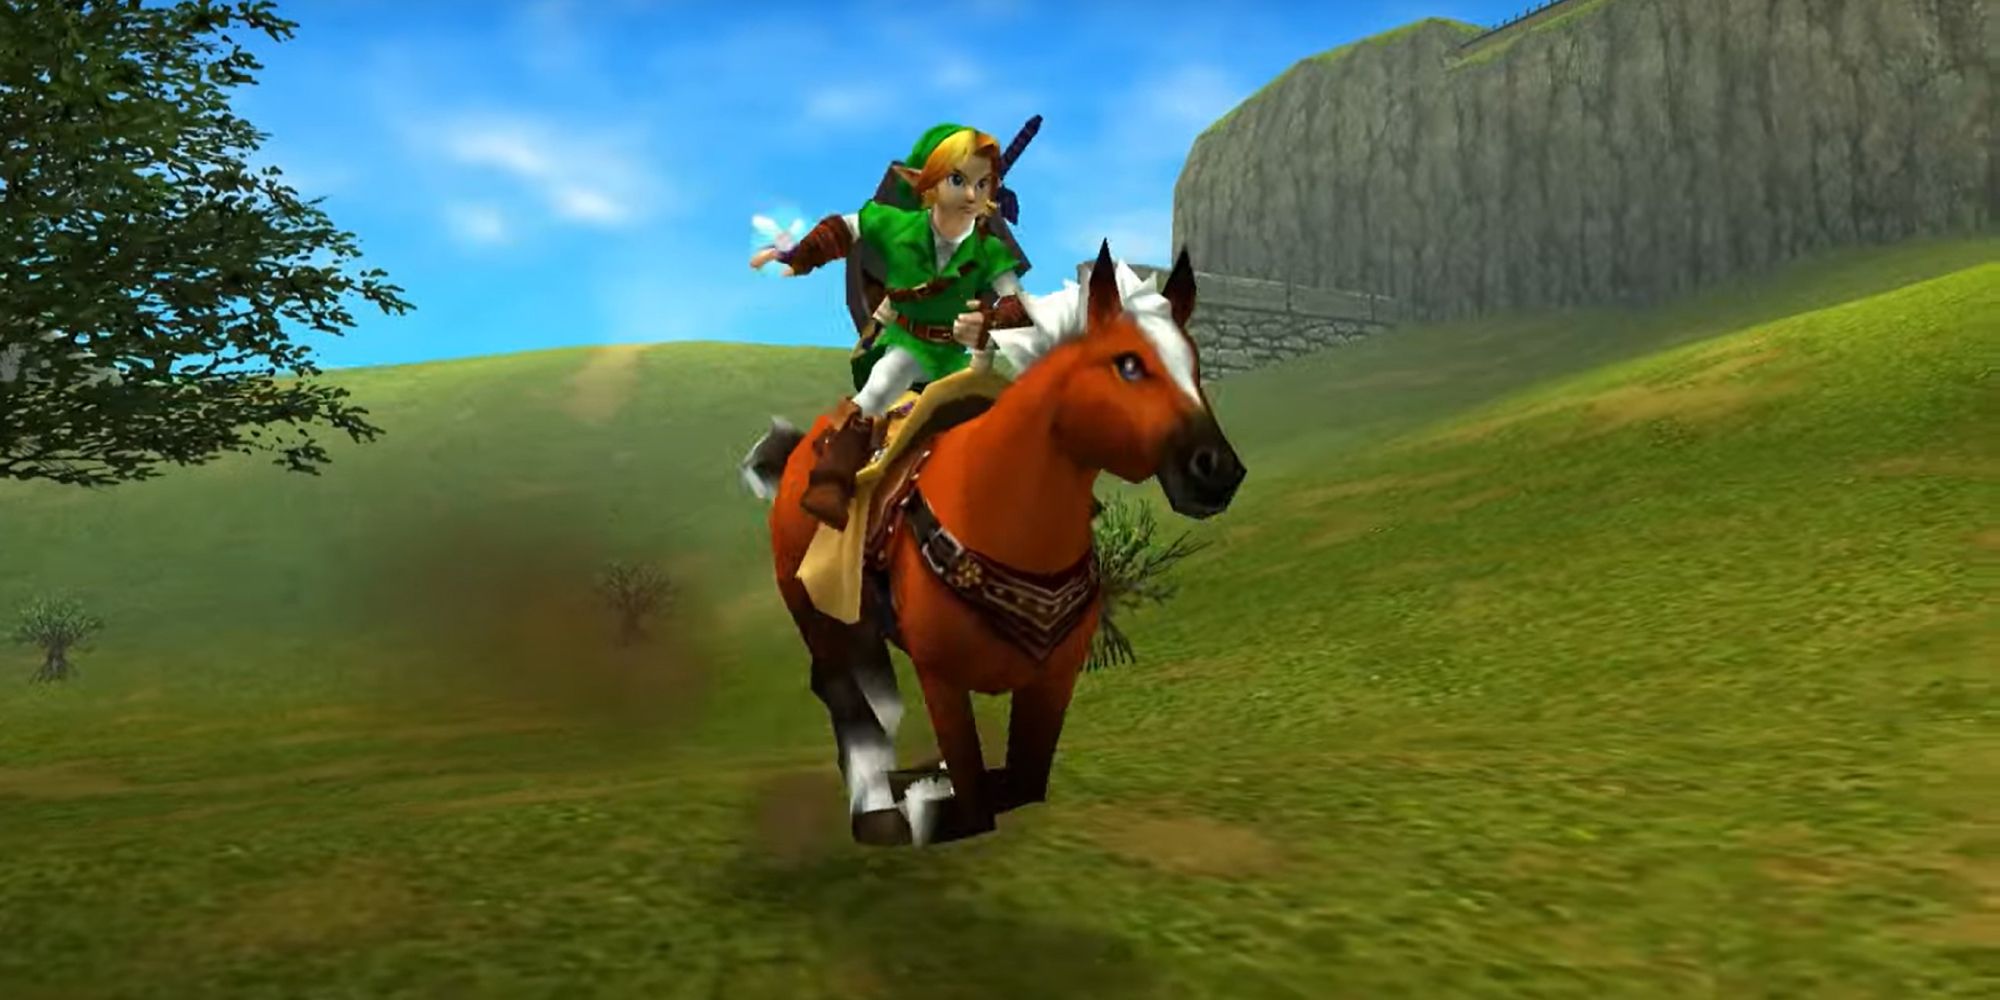 Ocarina of Time's Link Riding Epona in Hyrule Field